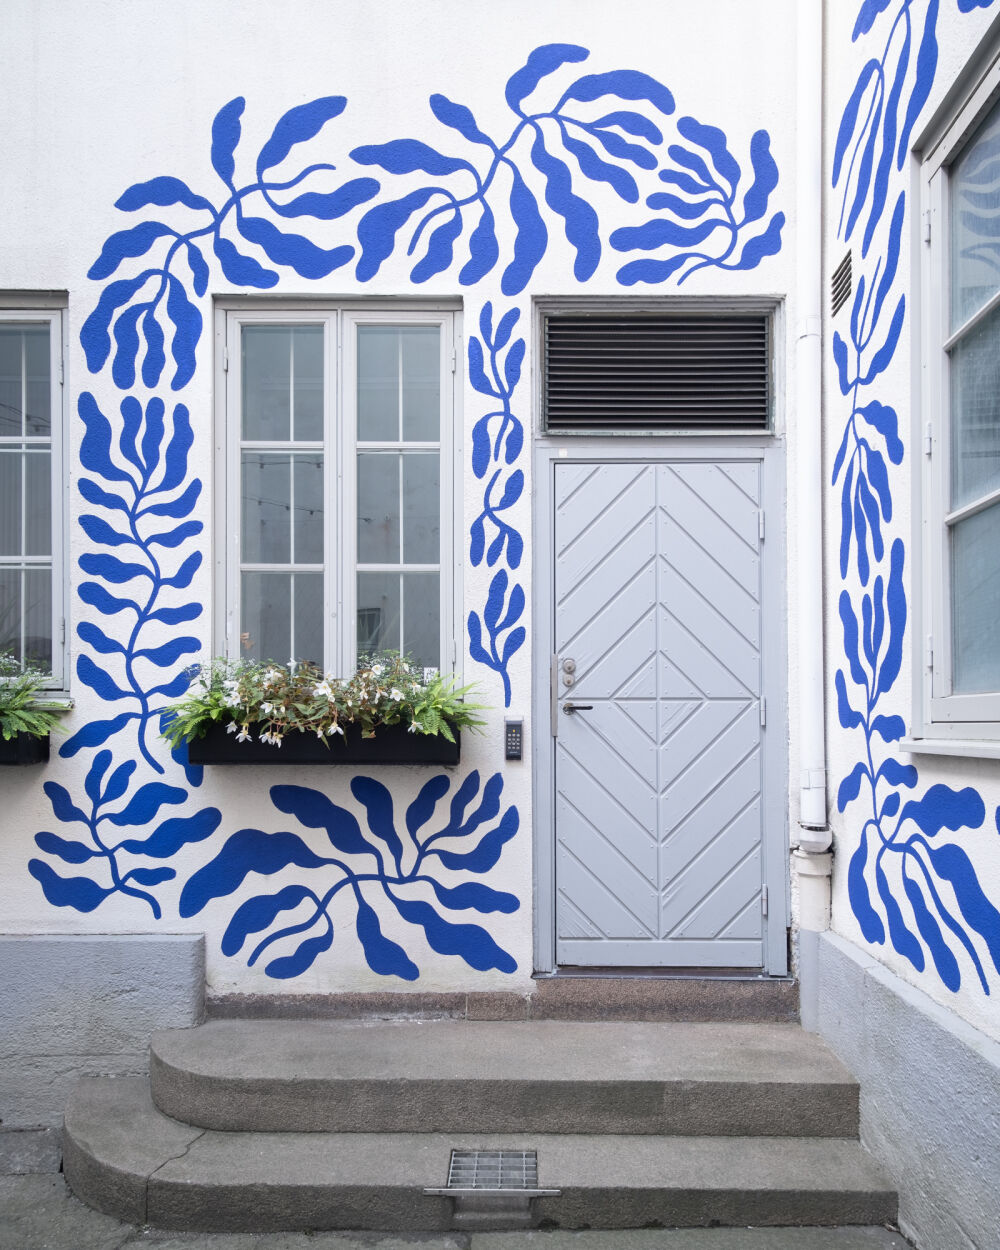 Handpainted mural by the illustrator and artist Linnéa Andersson